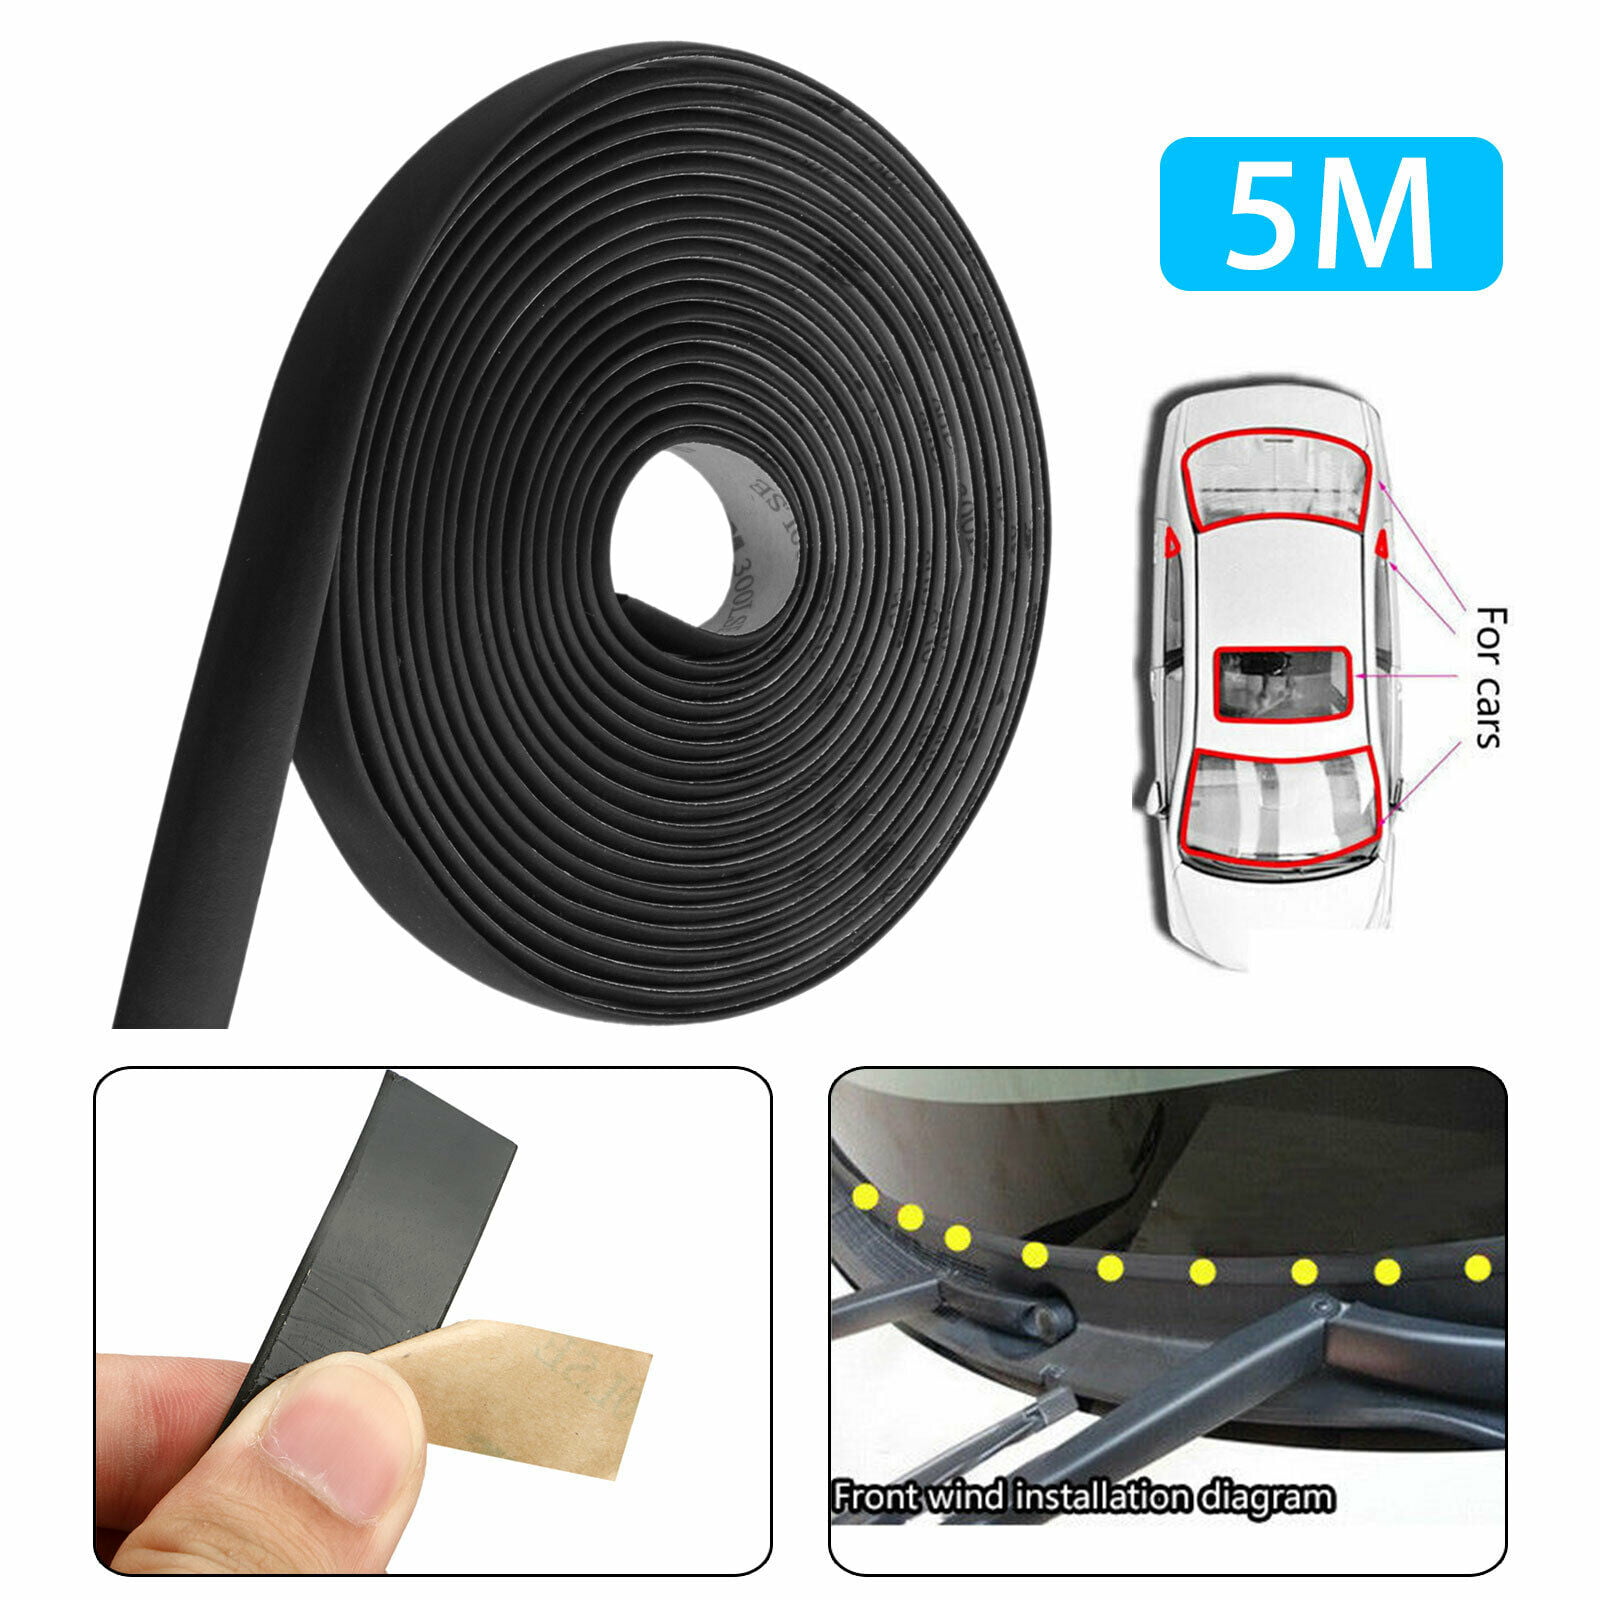 5M Sealed Strips Trim Moulding For Car Windshield Sunroof Triangular Window Seal